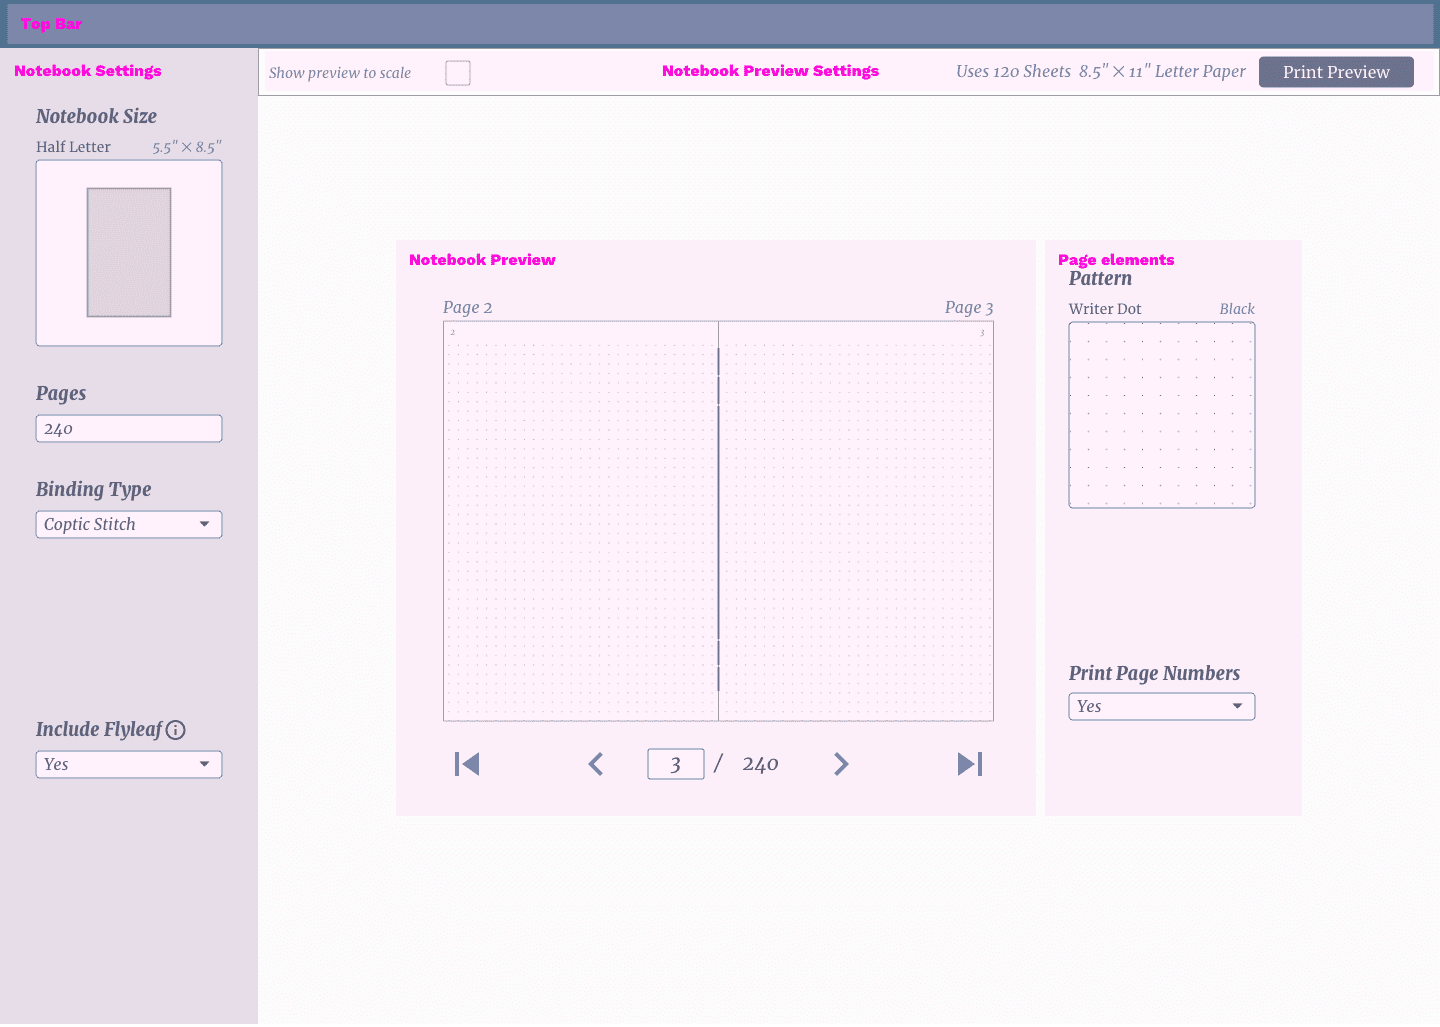 The new main screen takes on a different approach to organizing the controls than Iteration 1. You'll also see many new features added from insight through "dogfooding", such as an option to print page numbers and showing the number of required printer sheets